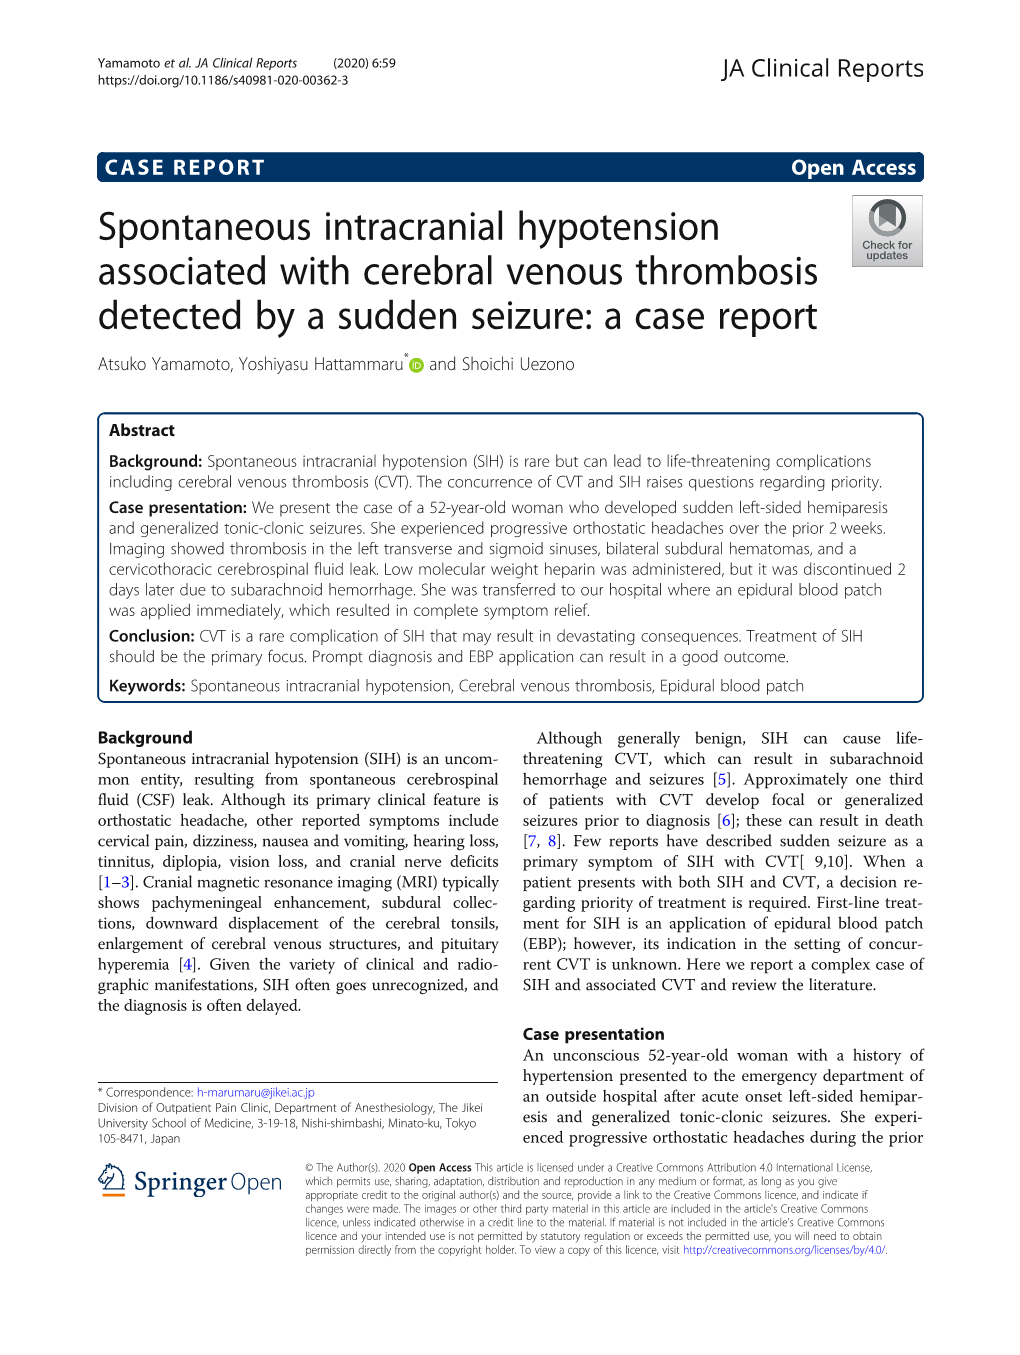 Spontaneous Intracranial Hypotension Associated